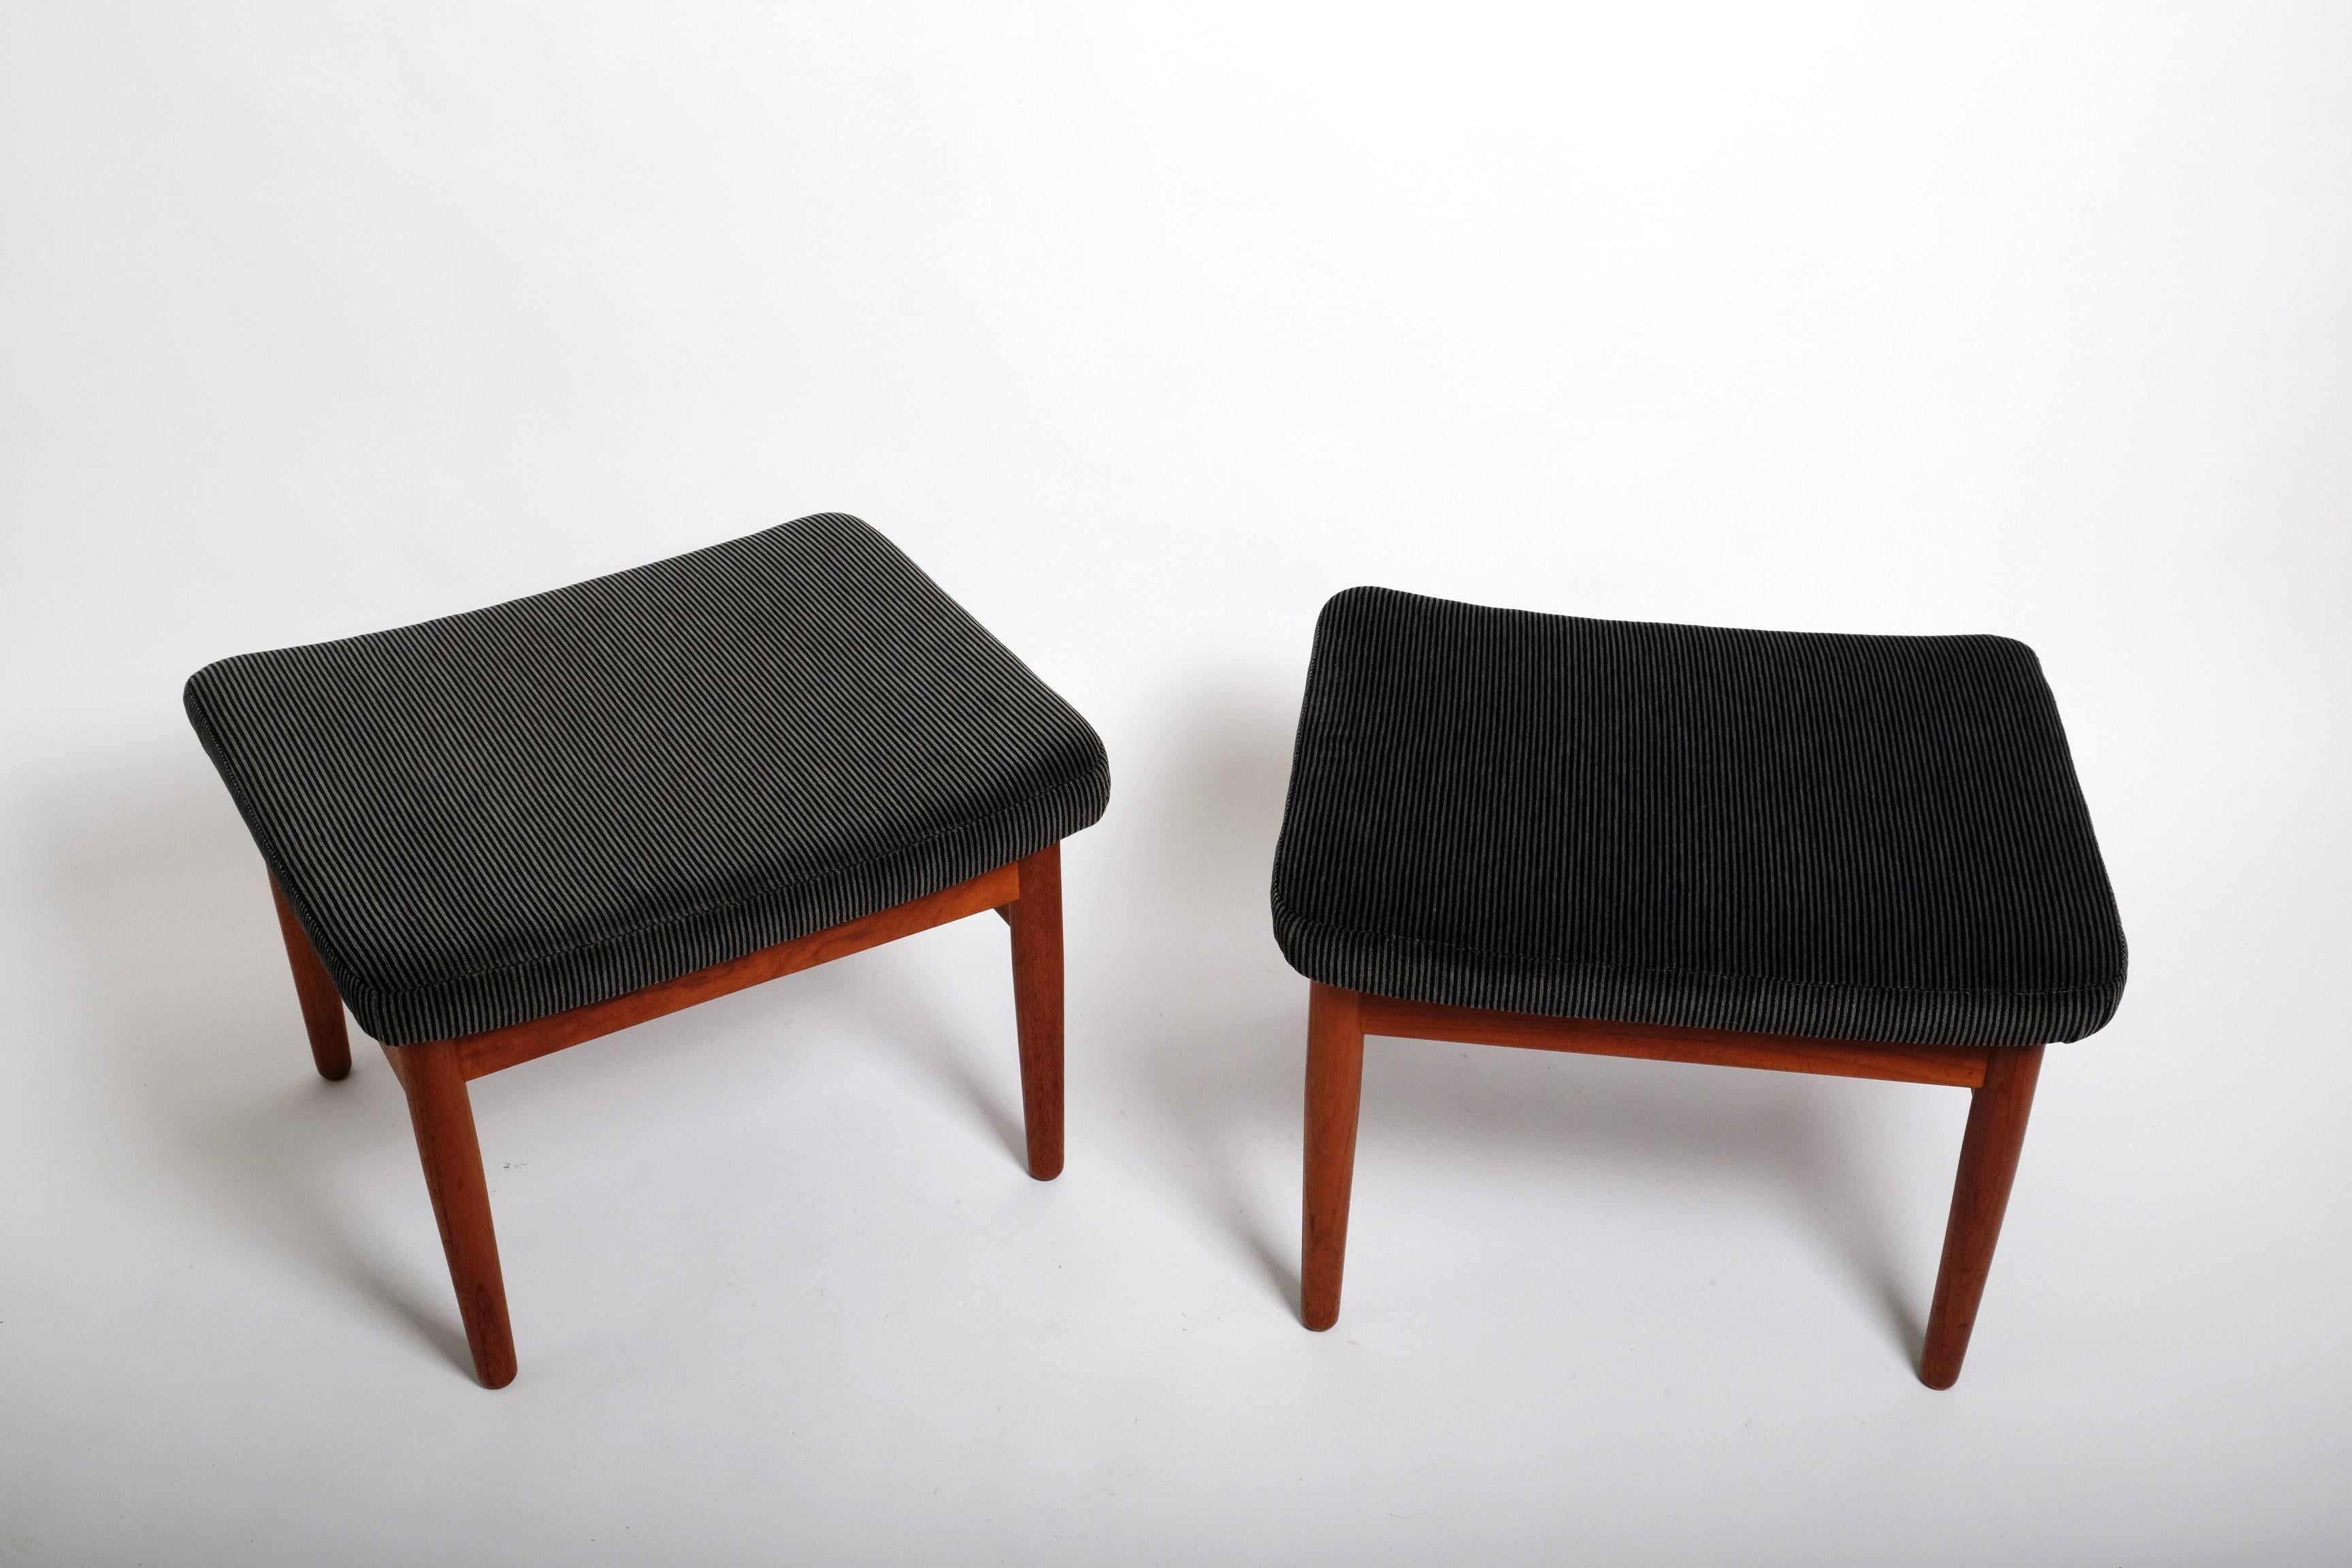 Two Mid-Century Stools by Arne Vodder FD164 Ottomans France & Son, Denmark 1960s For Sale 4